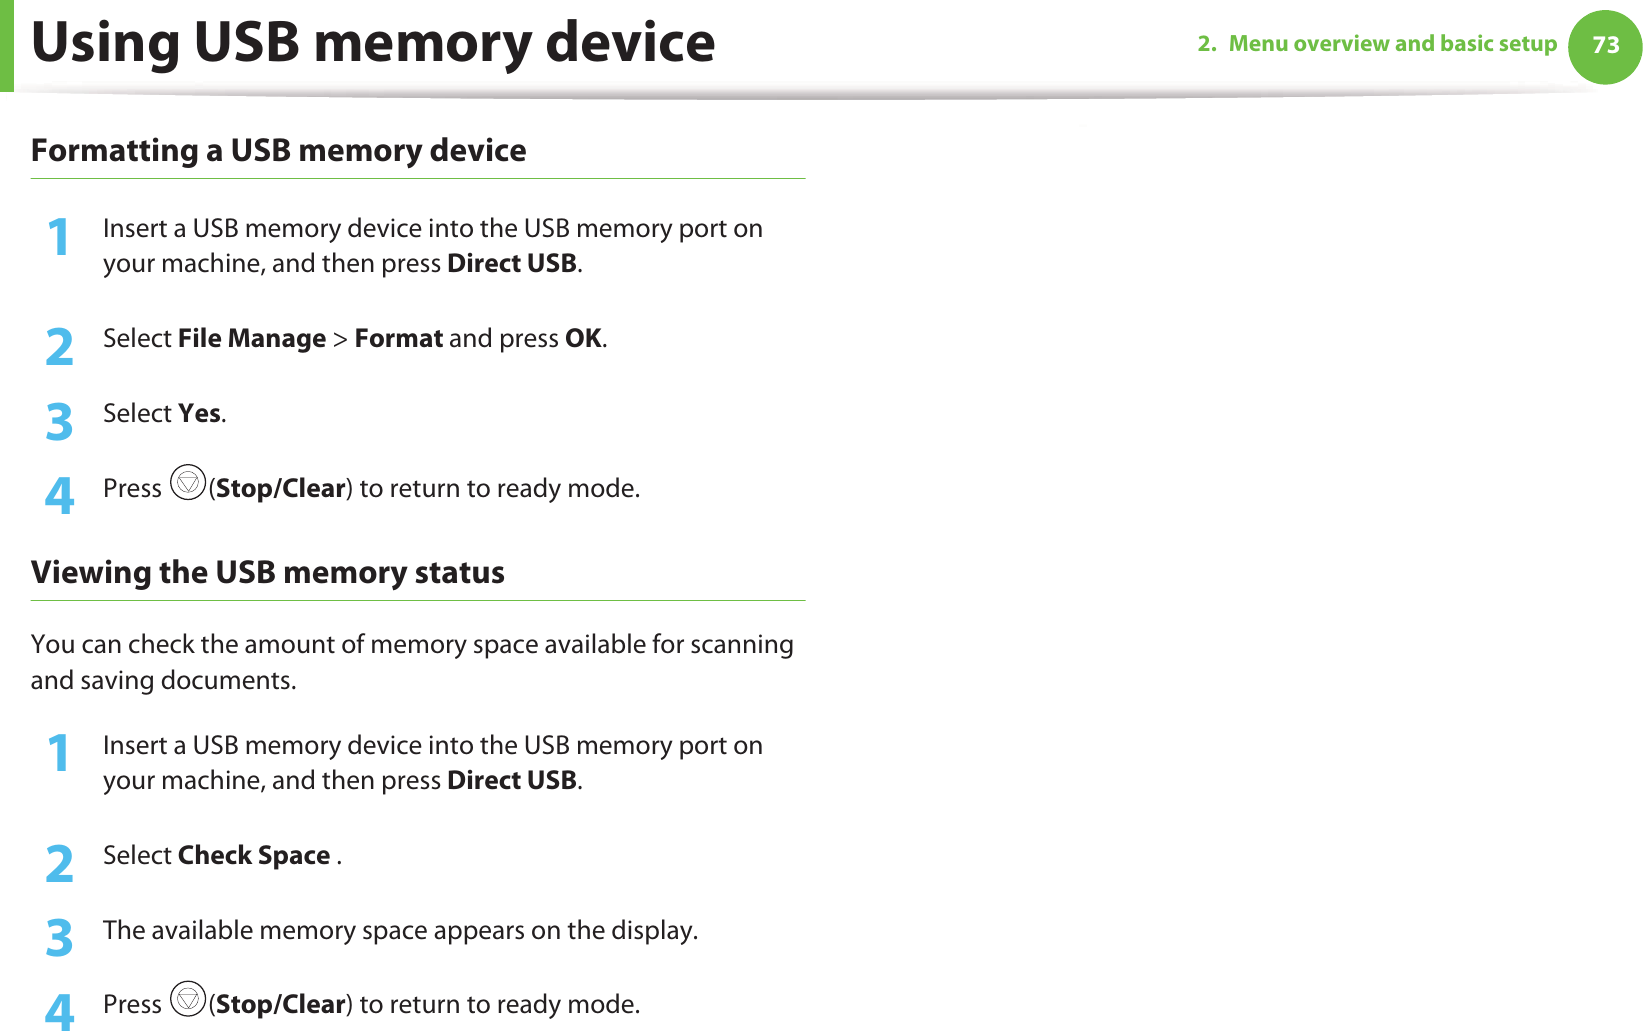 Using USB memory device 732. Menu overview and basic setupFormatting a USB memory device1Insert a USB memory device into the USB memory port on your machine, and then press Direct USB.2  Select File Manage &gt; Format and press OK.3  Select Yes.4  Press (Stop/Clear) to return to ready mode.Viewing the USB memory statusYou can check the amount of memory space available for scanning and saving documents.1Insert a USB memory device into the USB memory port on your machine, and then press Direct USB.2  Select Check Space .3  The available memory space appears on the display.4  Press (Stop/Clear) to return to ready mode.